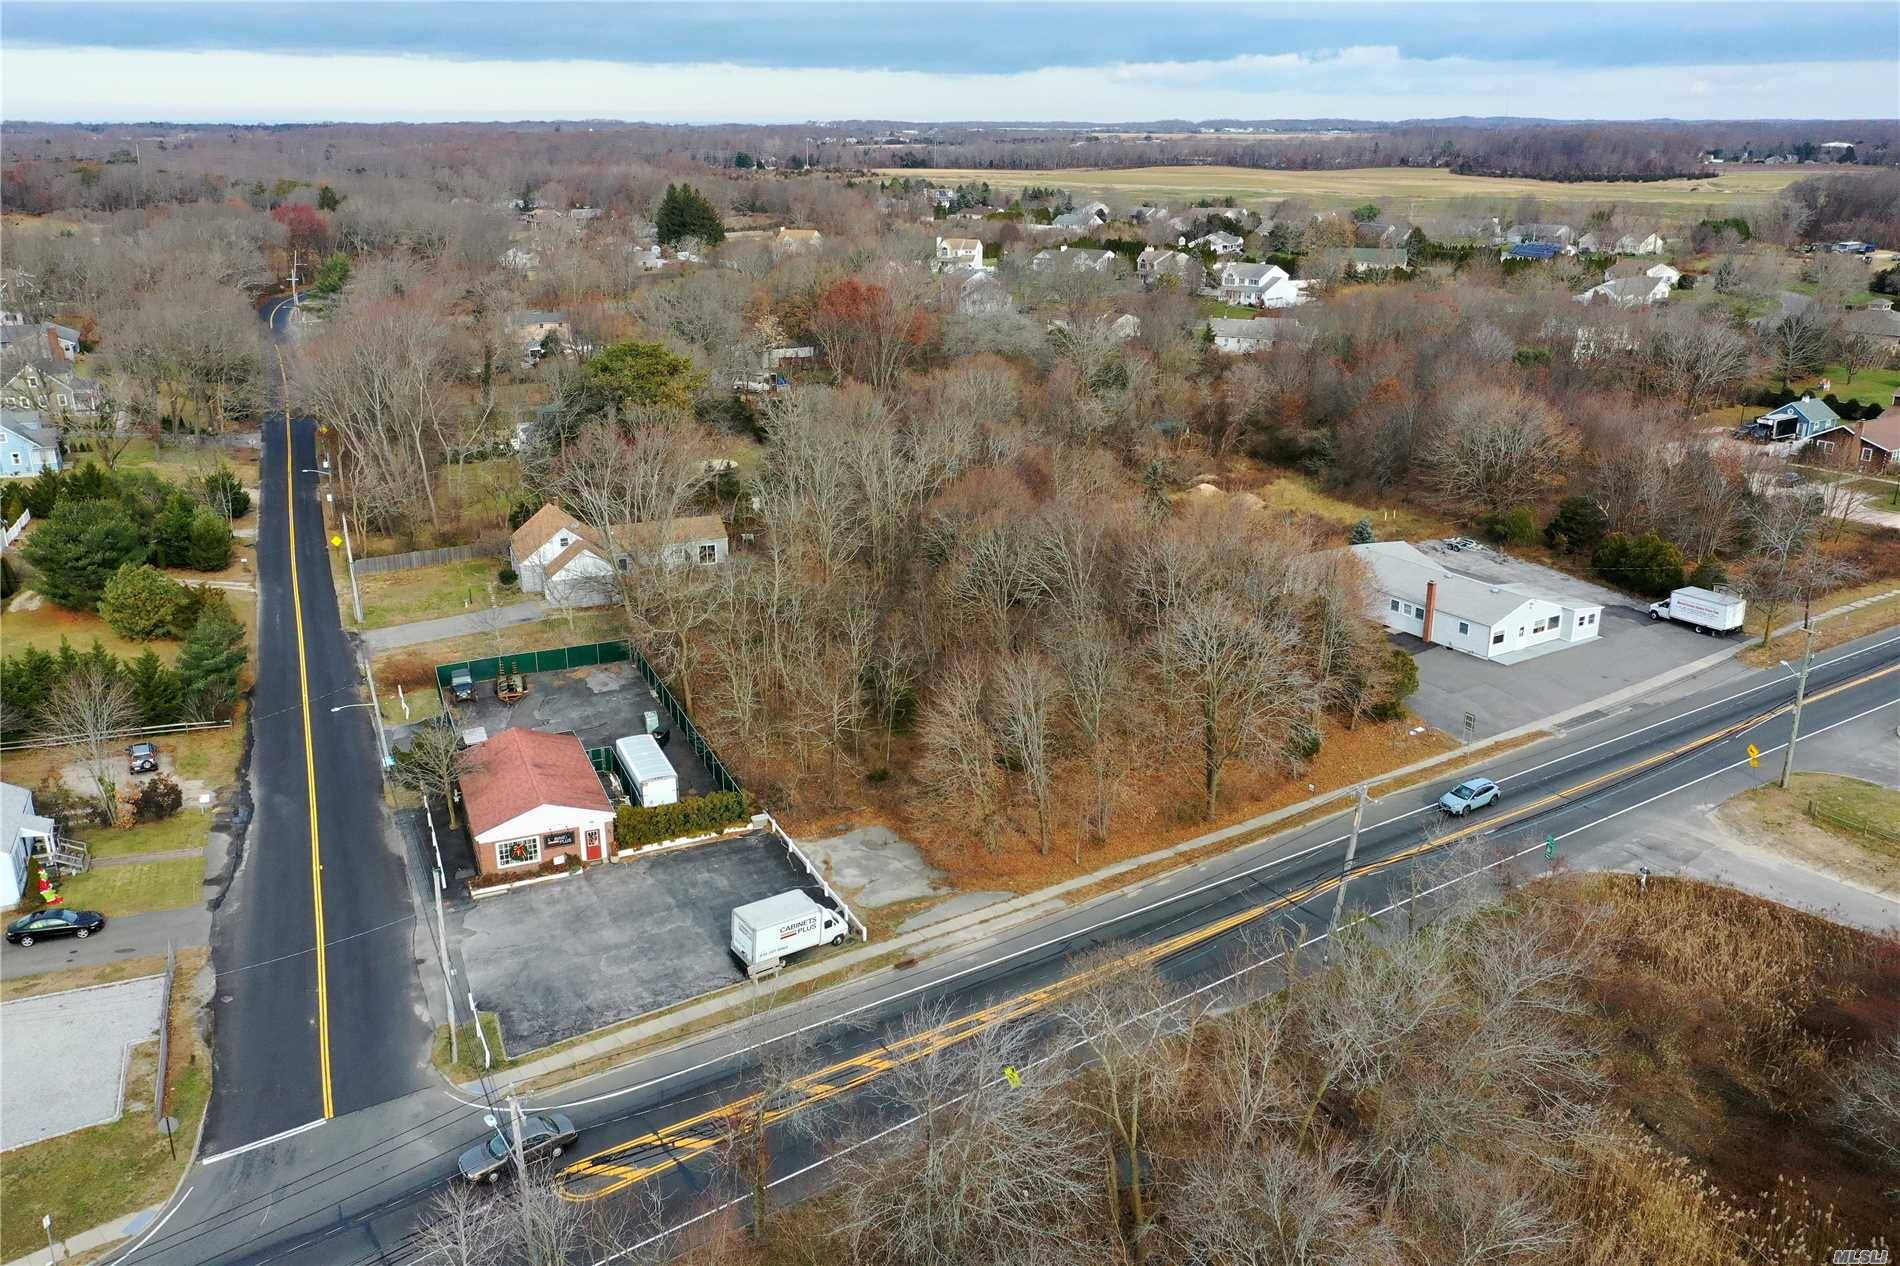 One Of The Last Vacant 1 Acre Parcels With Village Center Zoning, Unlimited Possibilities Including Microbreweries, Brewpubs, Microcideries, And Microwineries, Special Permit Uses.